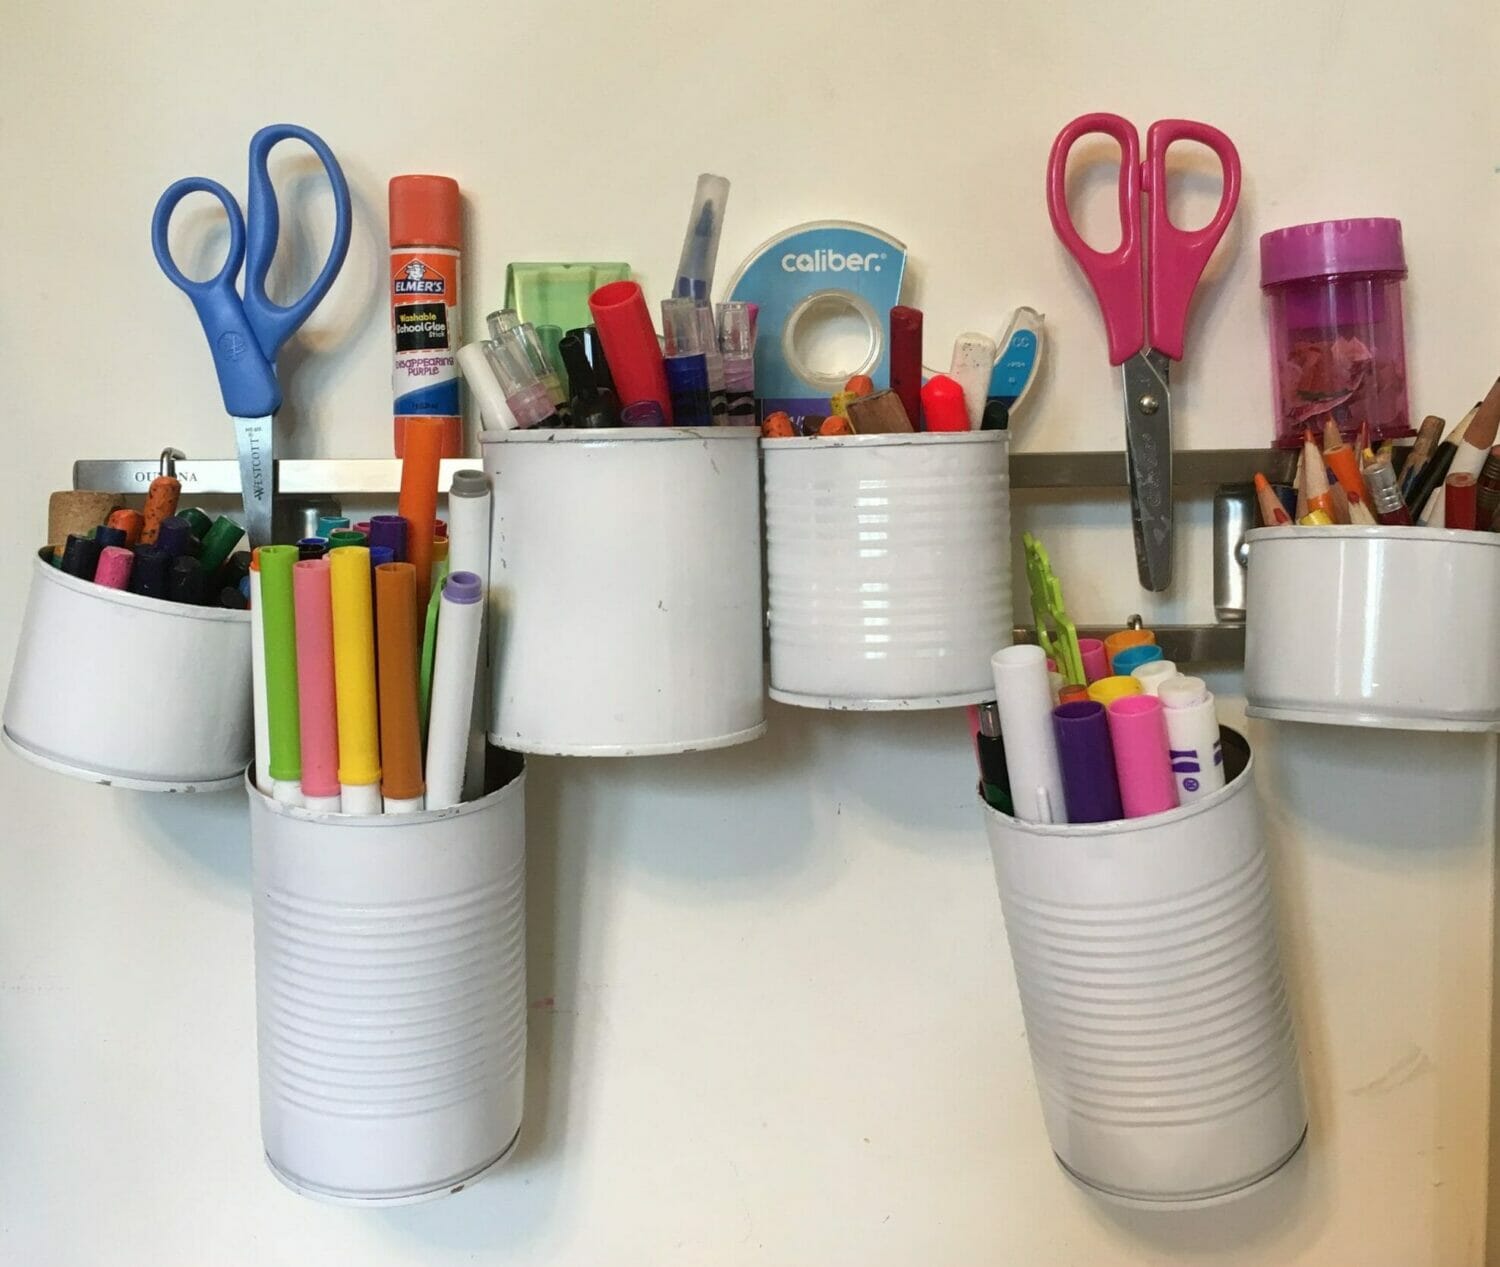 Pen+Gear Plastic Caddy, Kids' Craft Organizer with Handle, Putting